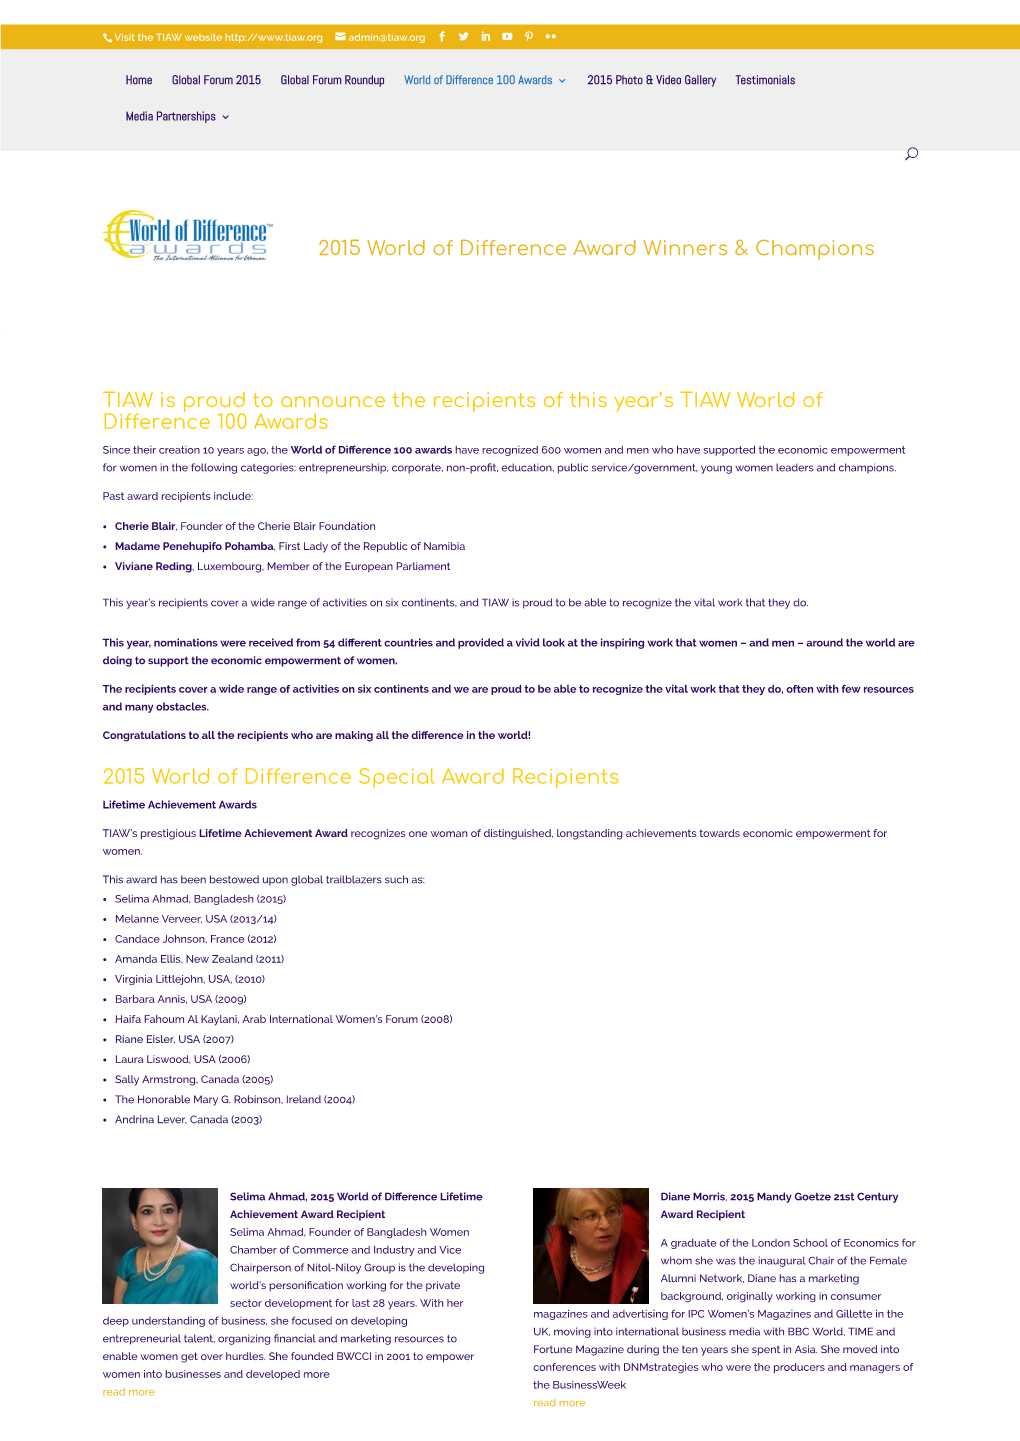 2015 World of Difference Award Winners and Champions Stories